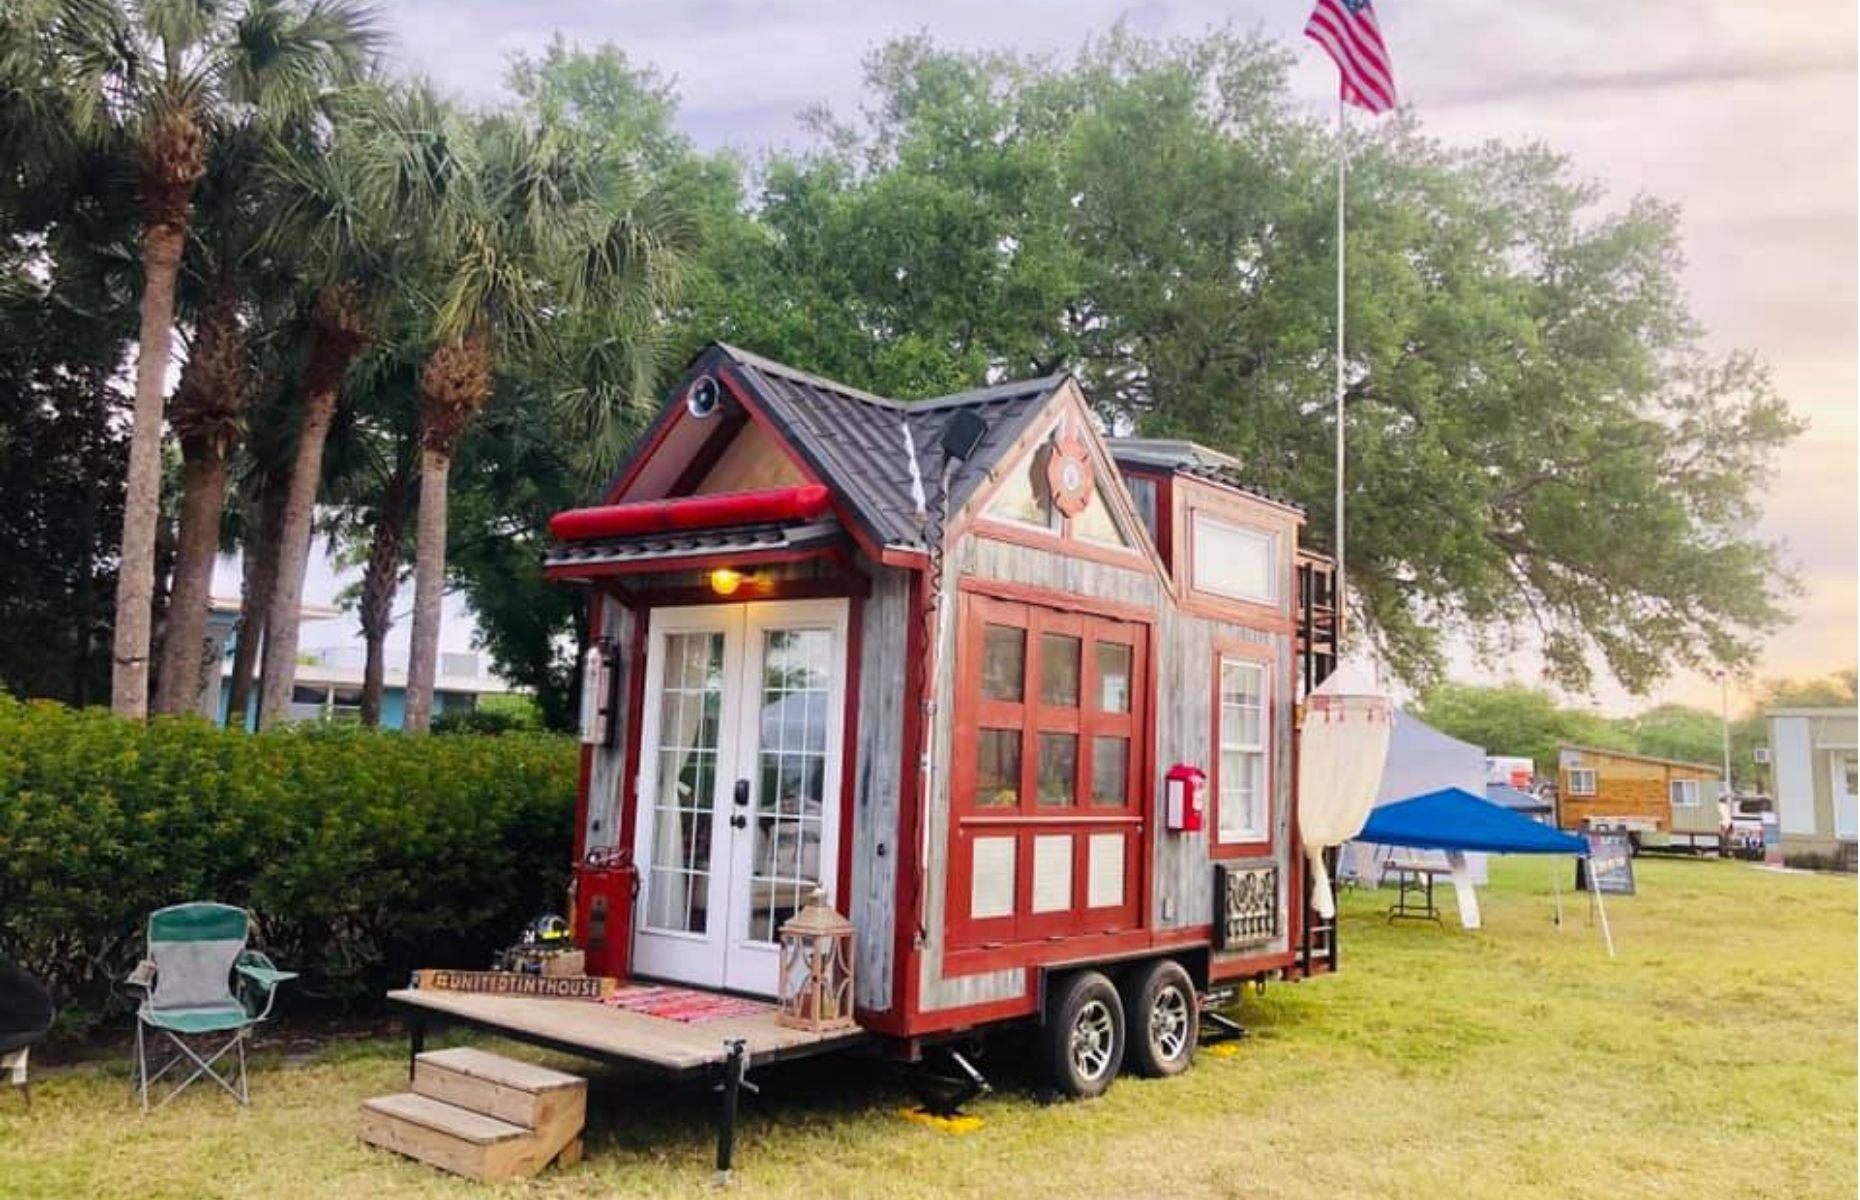 <p>This unique tiny home is one of the coolest conversion projects we’ve seen. Known as the <a href="https://www.facebook.com/pg/tinyfirehouse">Tiny Firehouse – Station No. 9</a>, the petite pad is another amazing creation by John and Fin Kernohan. They designed the mobile retreat as a tribute to retired and active firefighters, as well as first responder heroes who are no longer with us.</p>